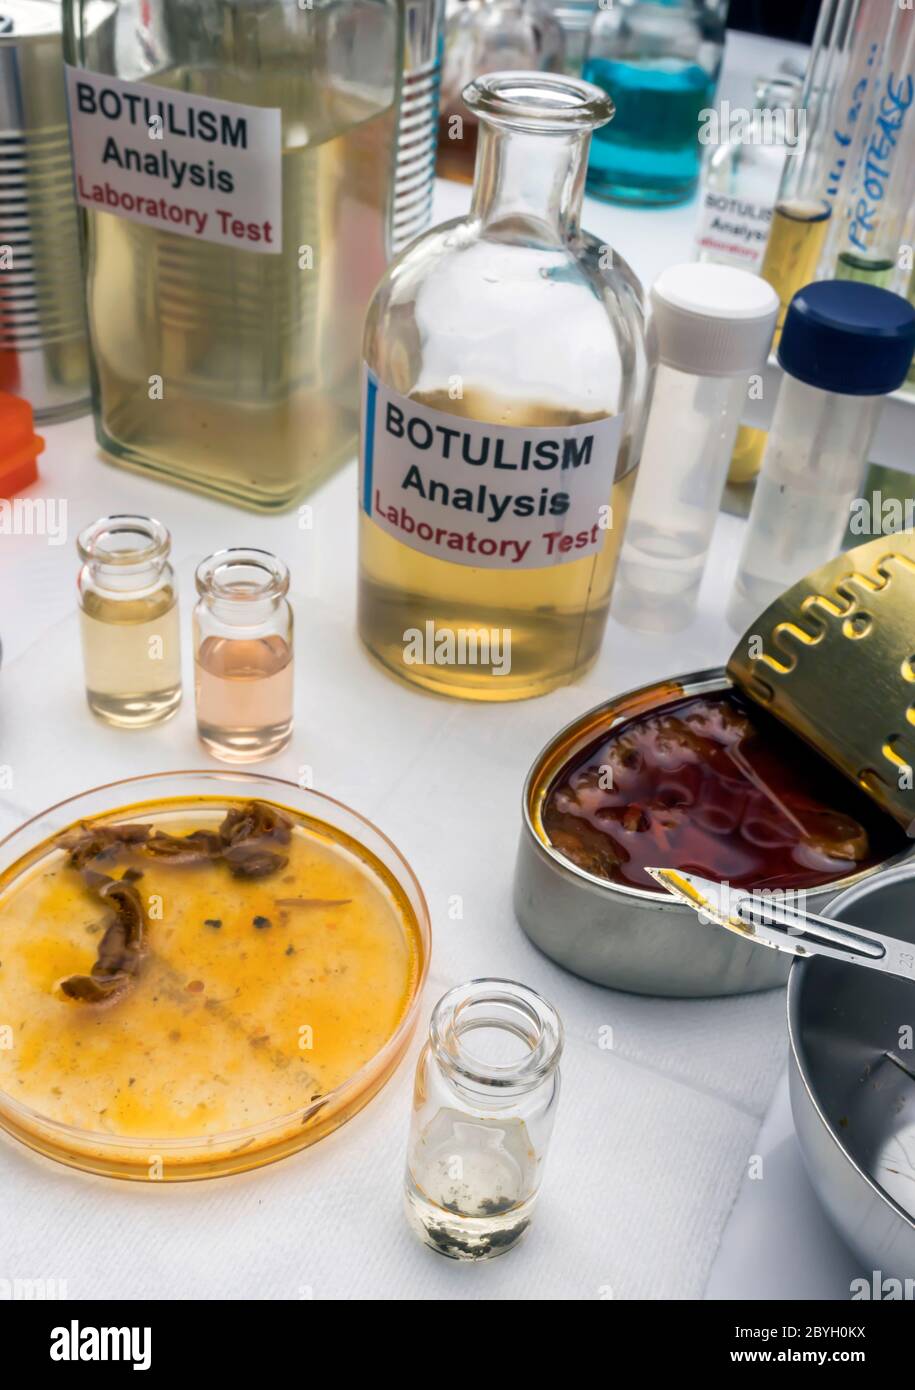 Samples contaminated by Clostridium botulinum toxin that causes botulism in humans, laboratory research, conceptual image Stock Photo